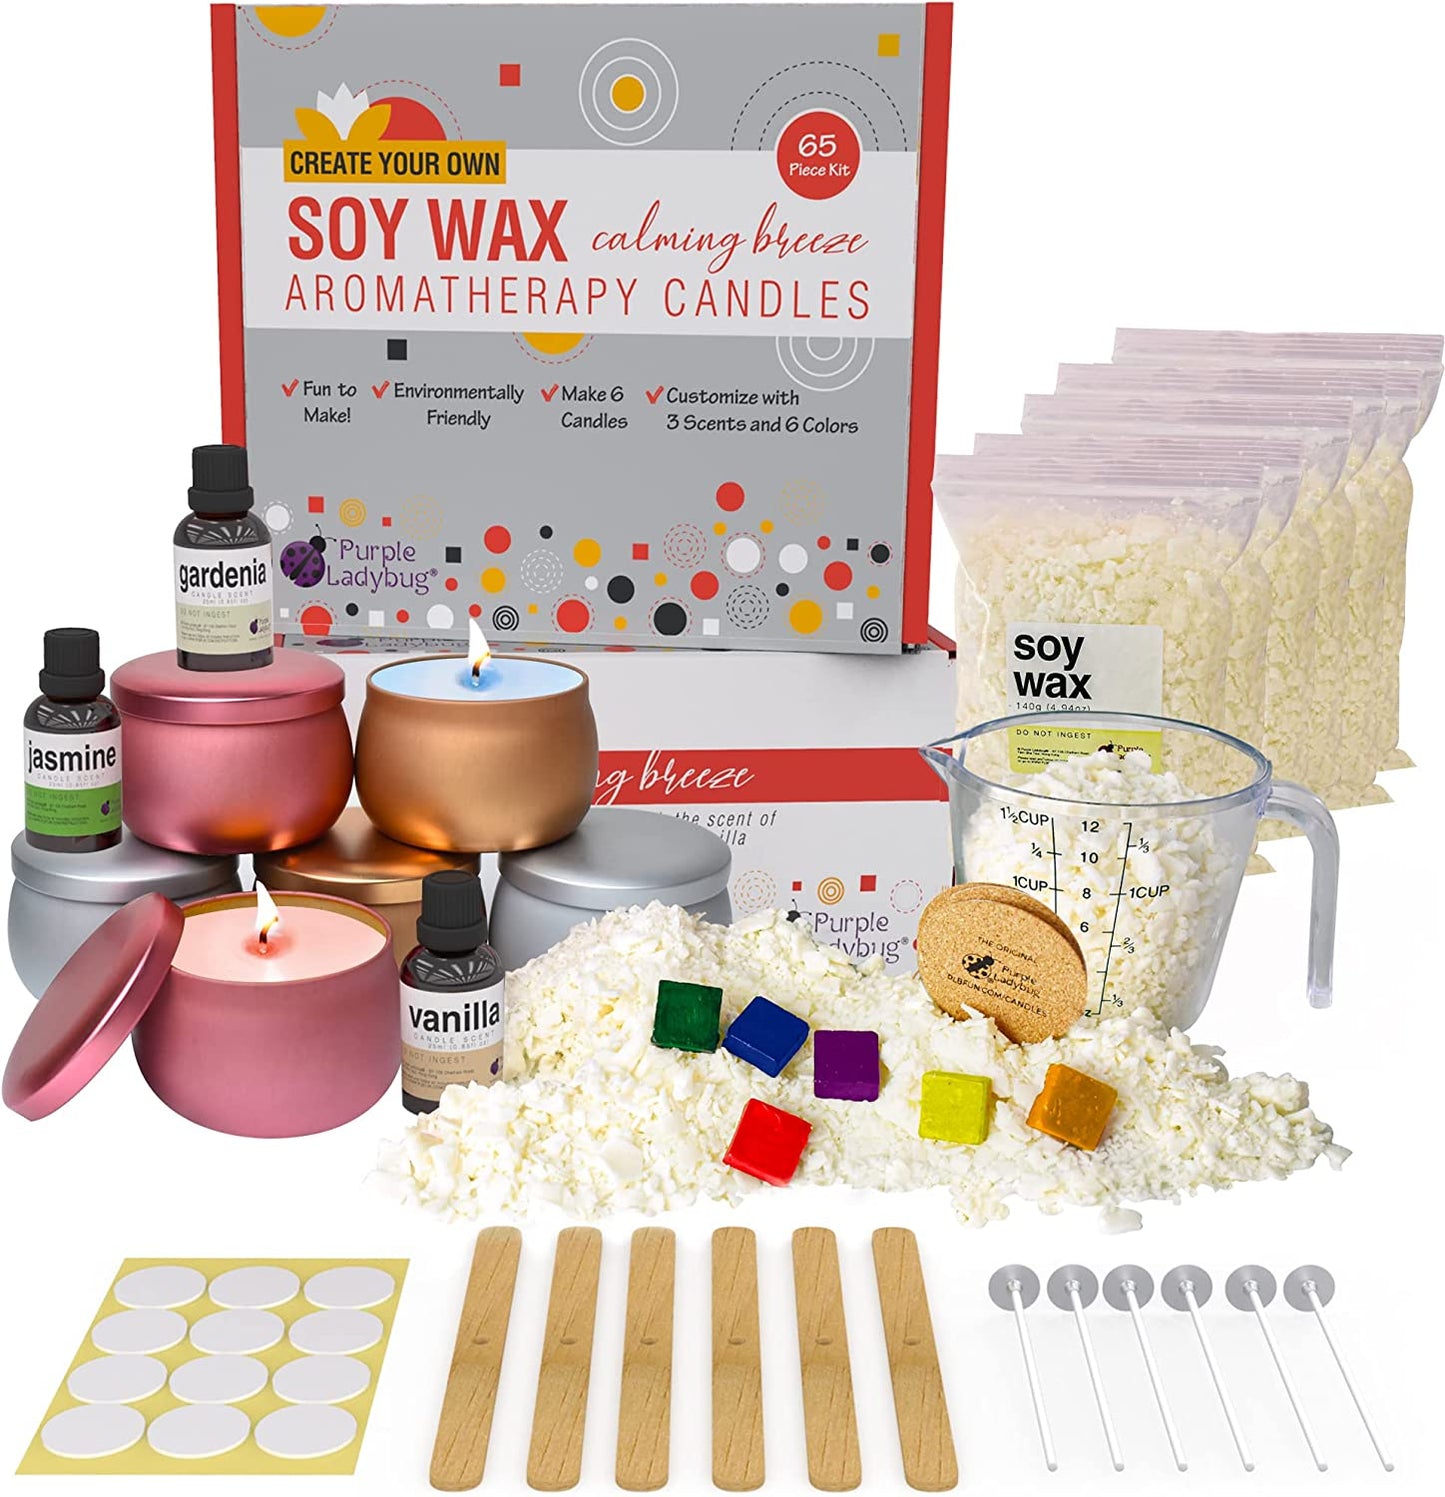 Candle Refill Kit - Soy Wax — Blythewood General Store